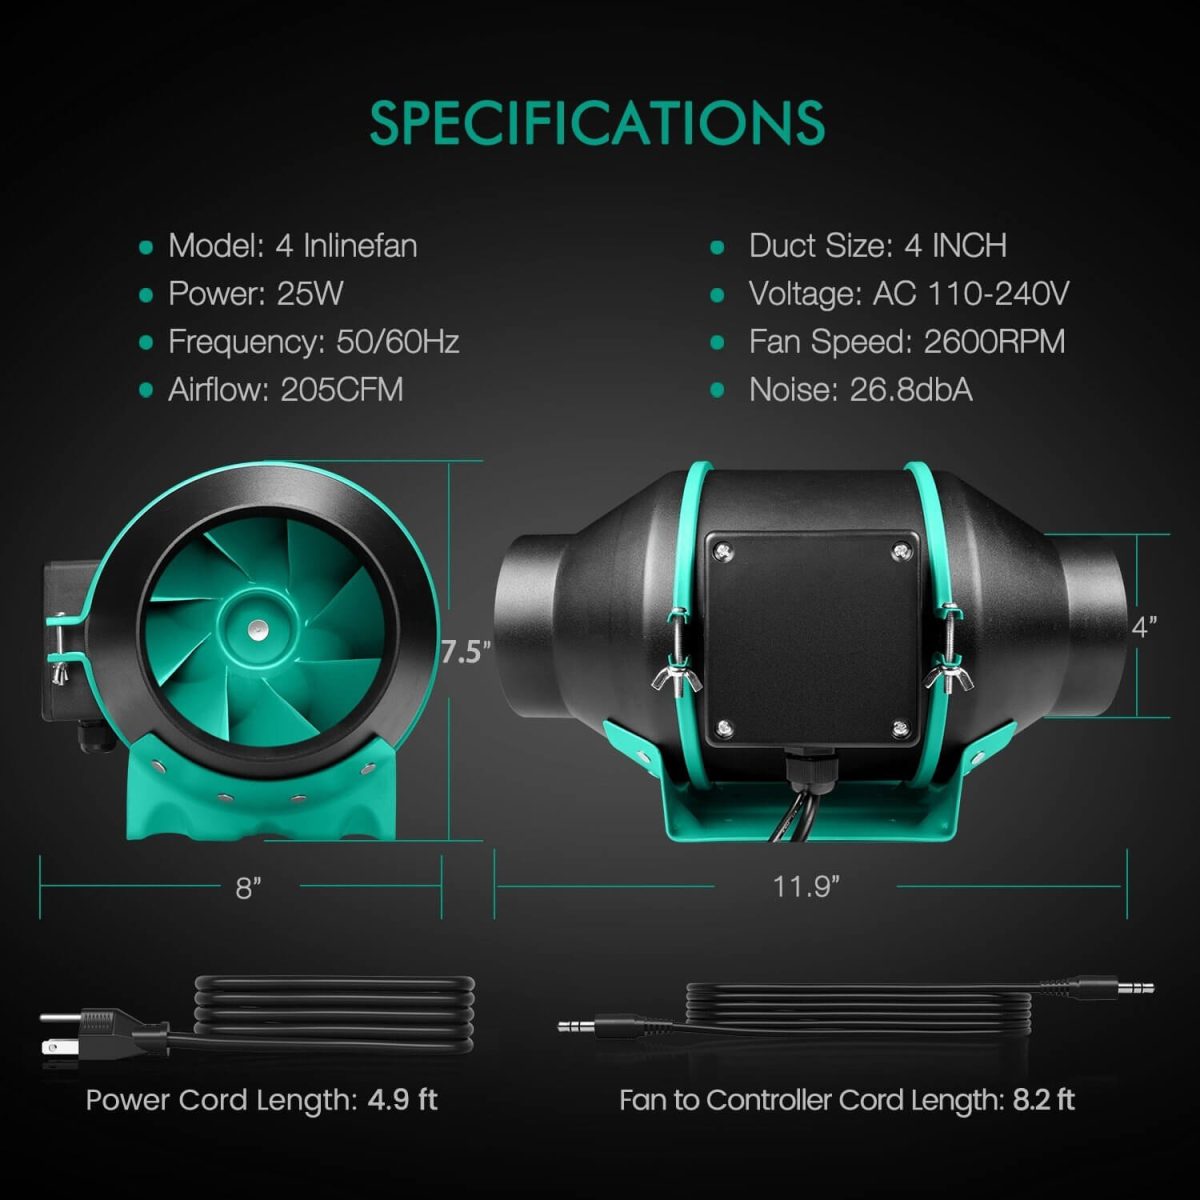 Specifications of 4inch inline fan, low noise 26DB very quite